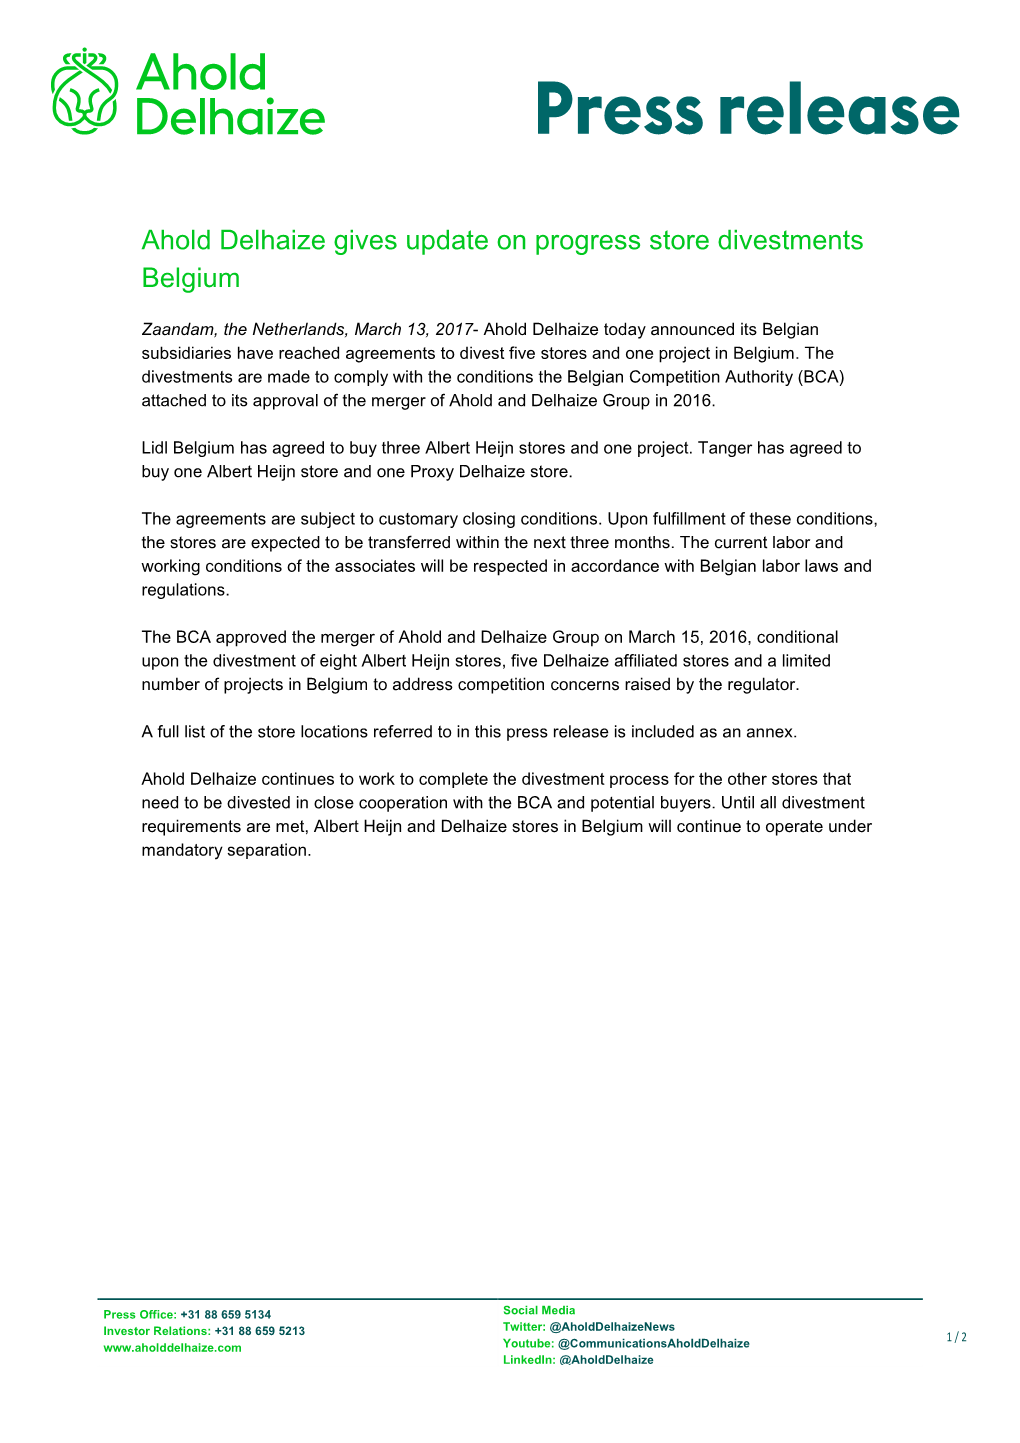 Ahold Delhaize Gives Update on Progress Store Divestments Belgium